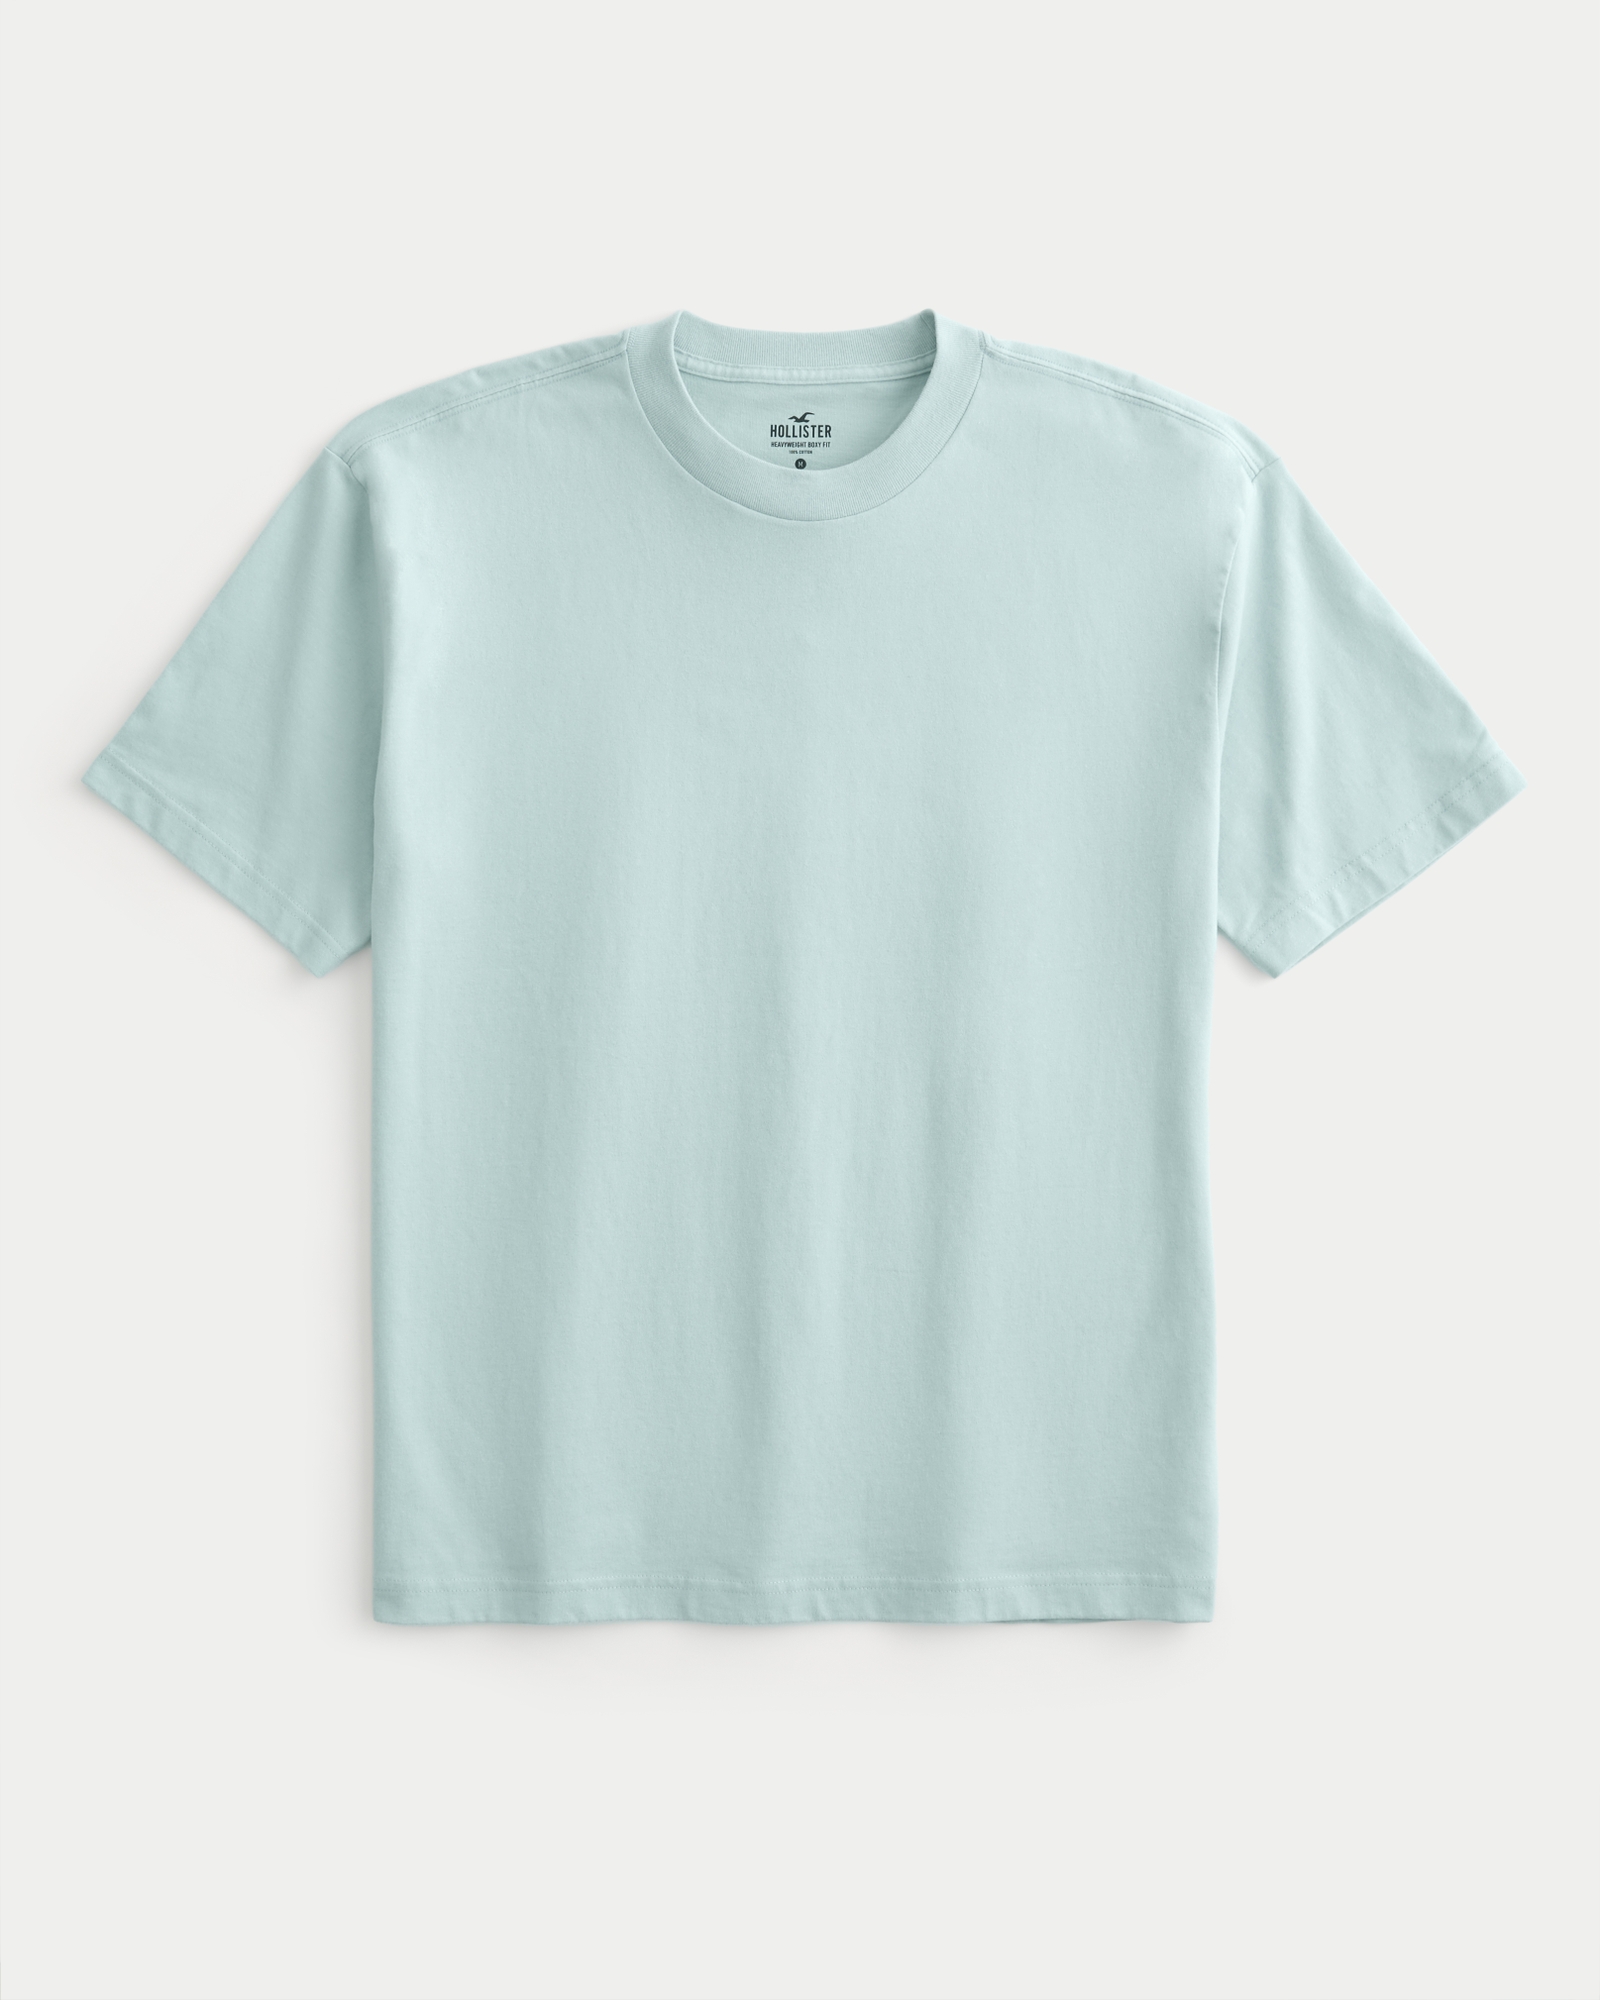 Hollister central logo oversized boxy fit t-shirt in turquoise blue